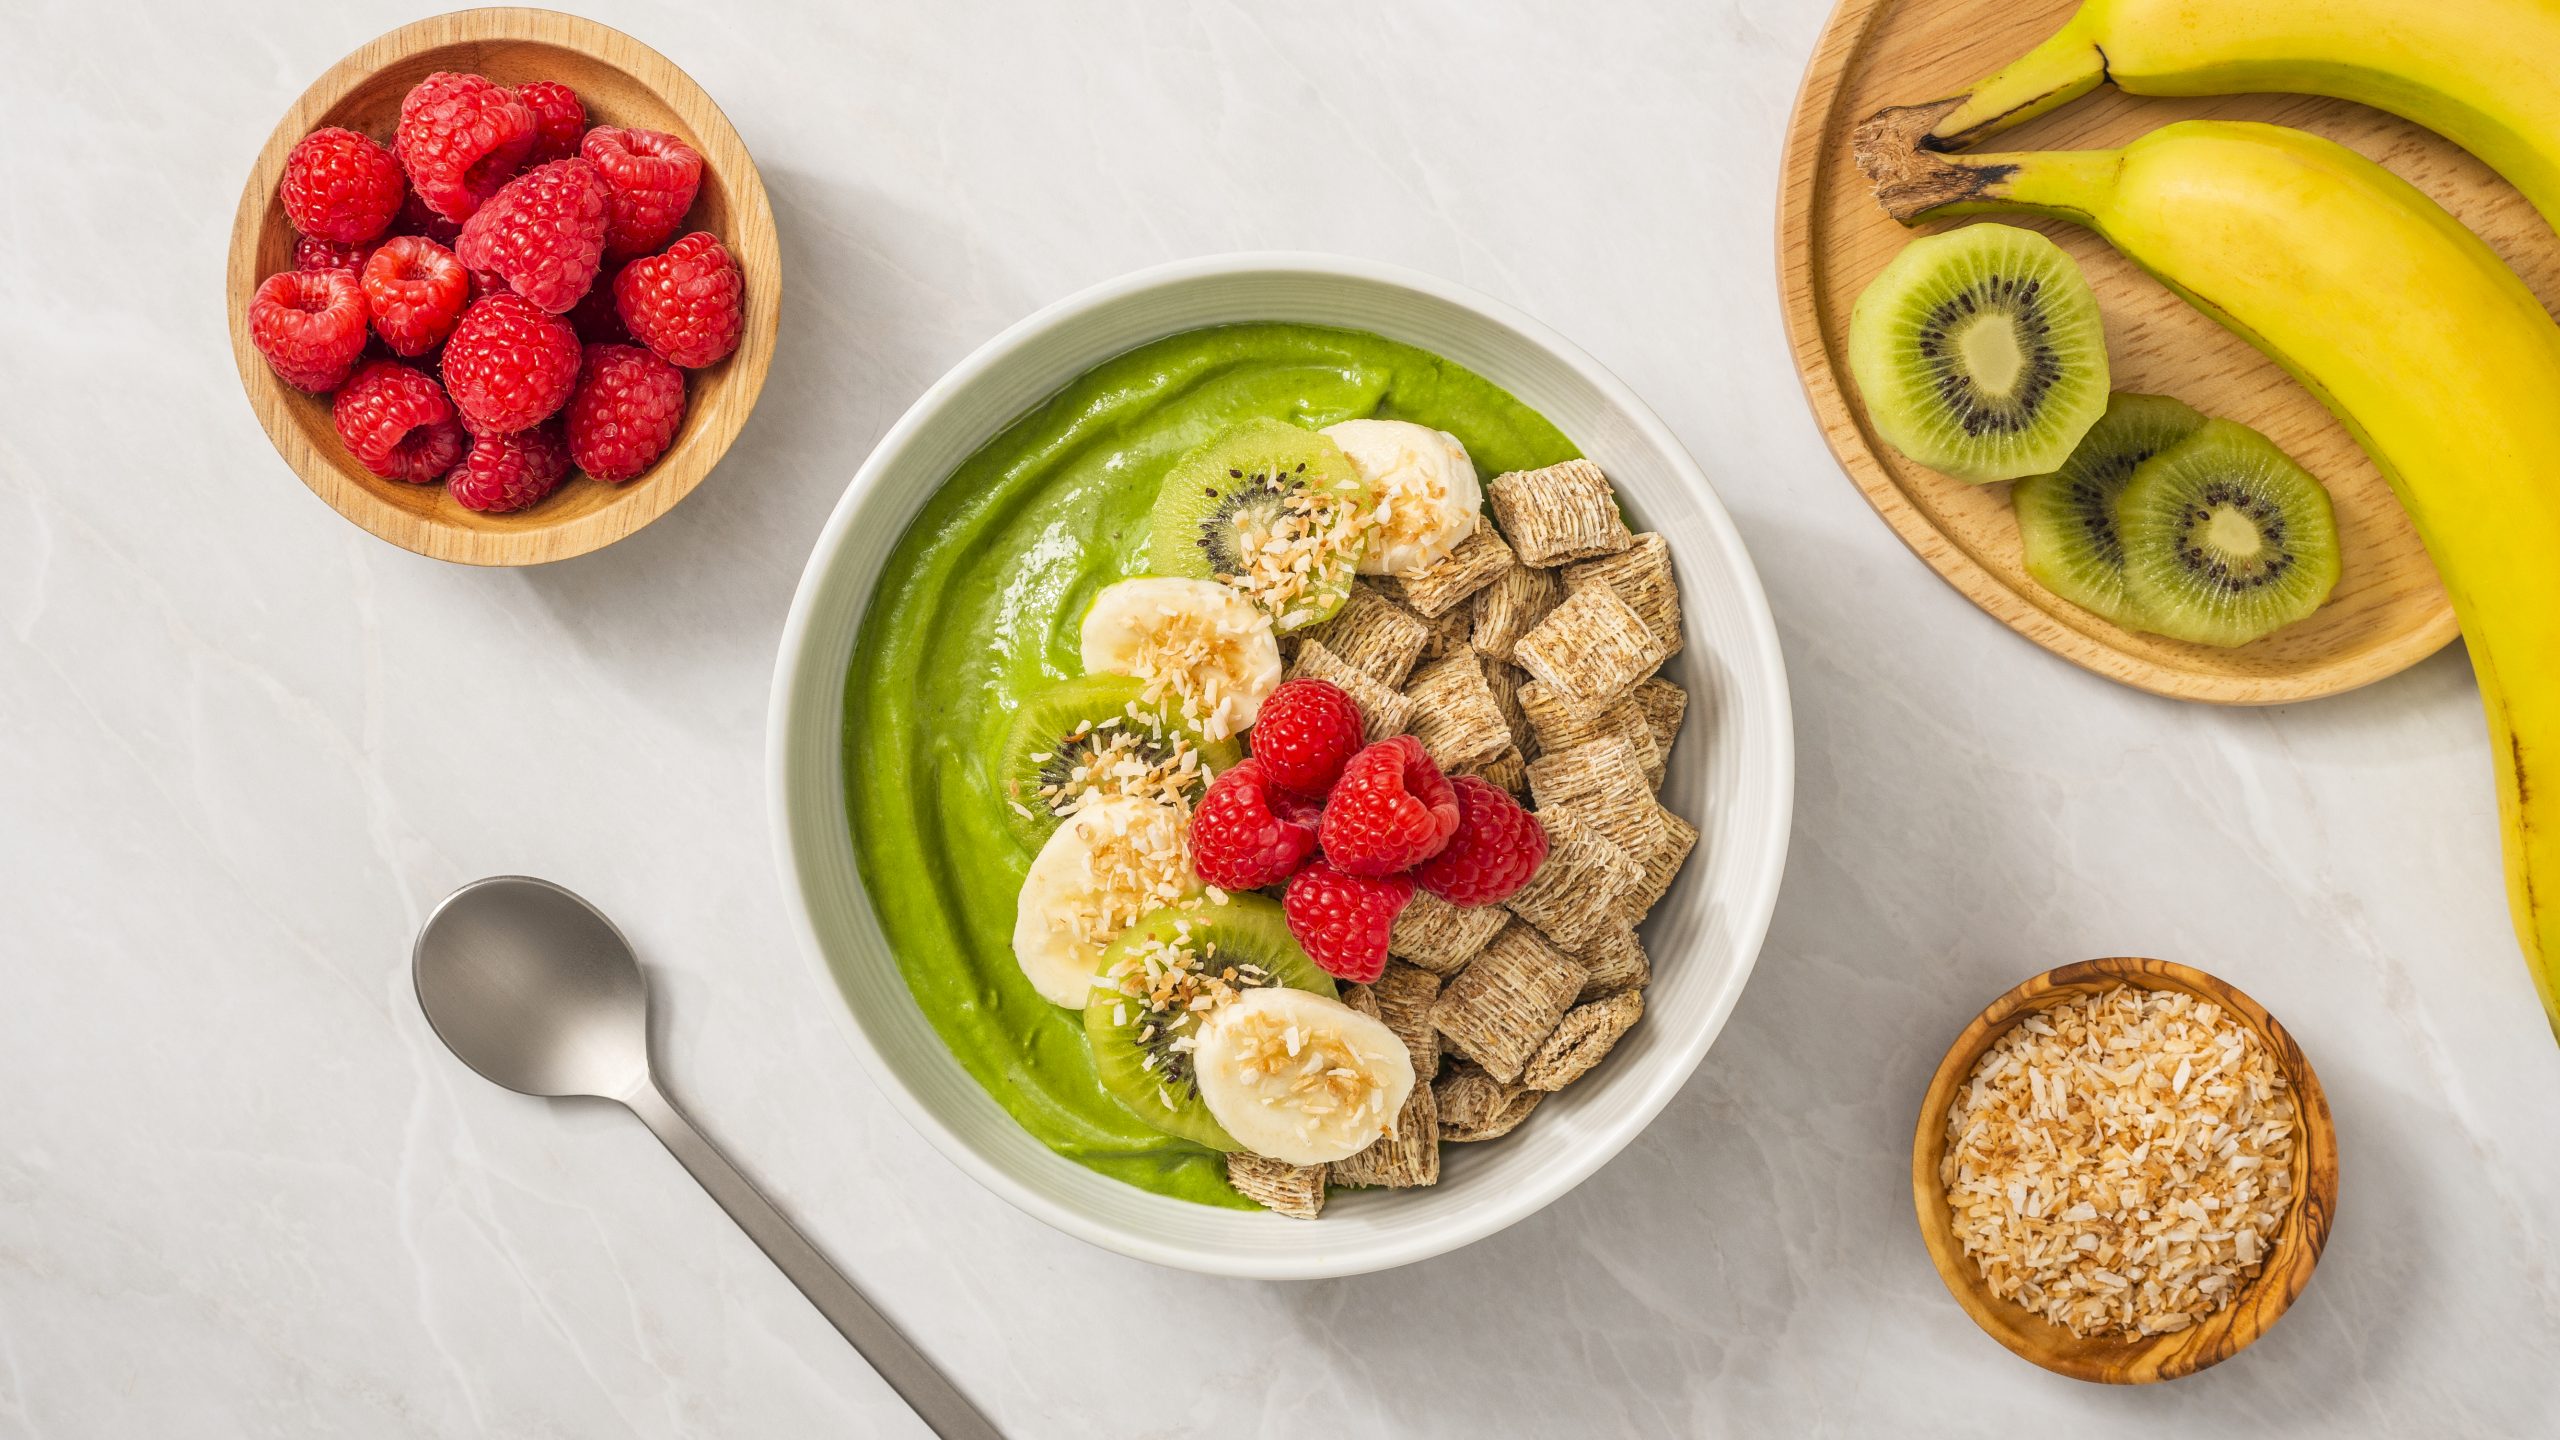 Green Goddess smoothie made with Shredded Wheat in a white bowl with banana slices and raspberries on top. Sliced kiwi, bananas and raspberries in separate bowls.